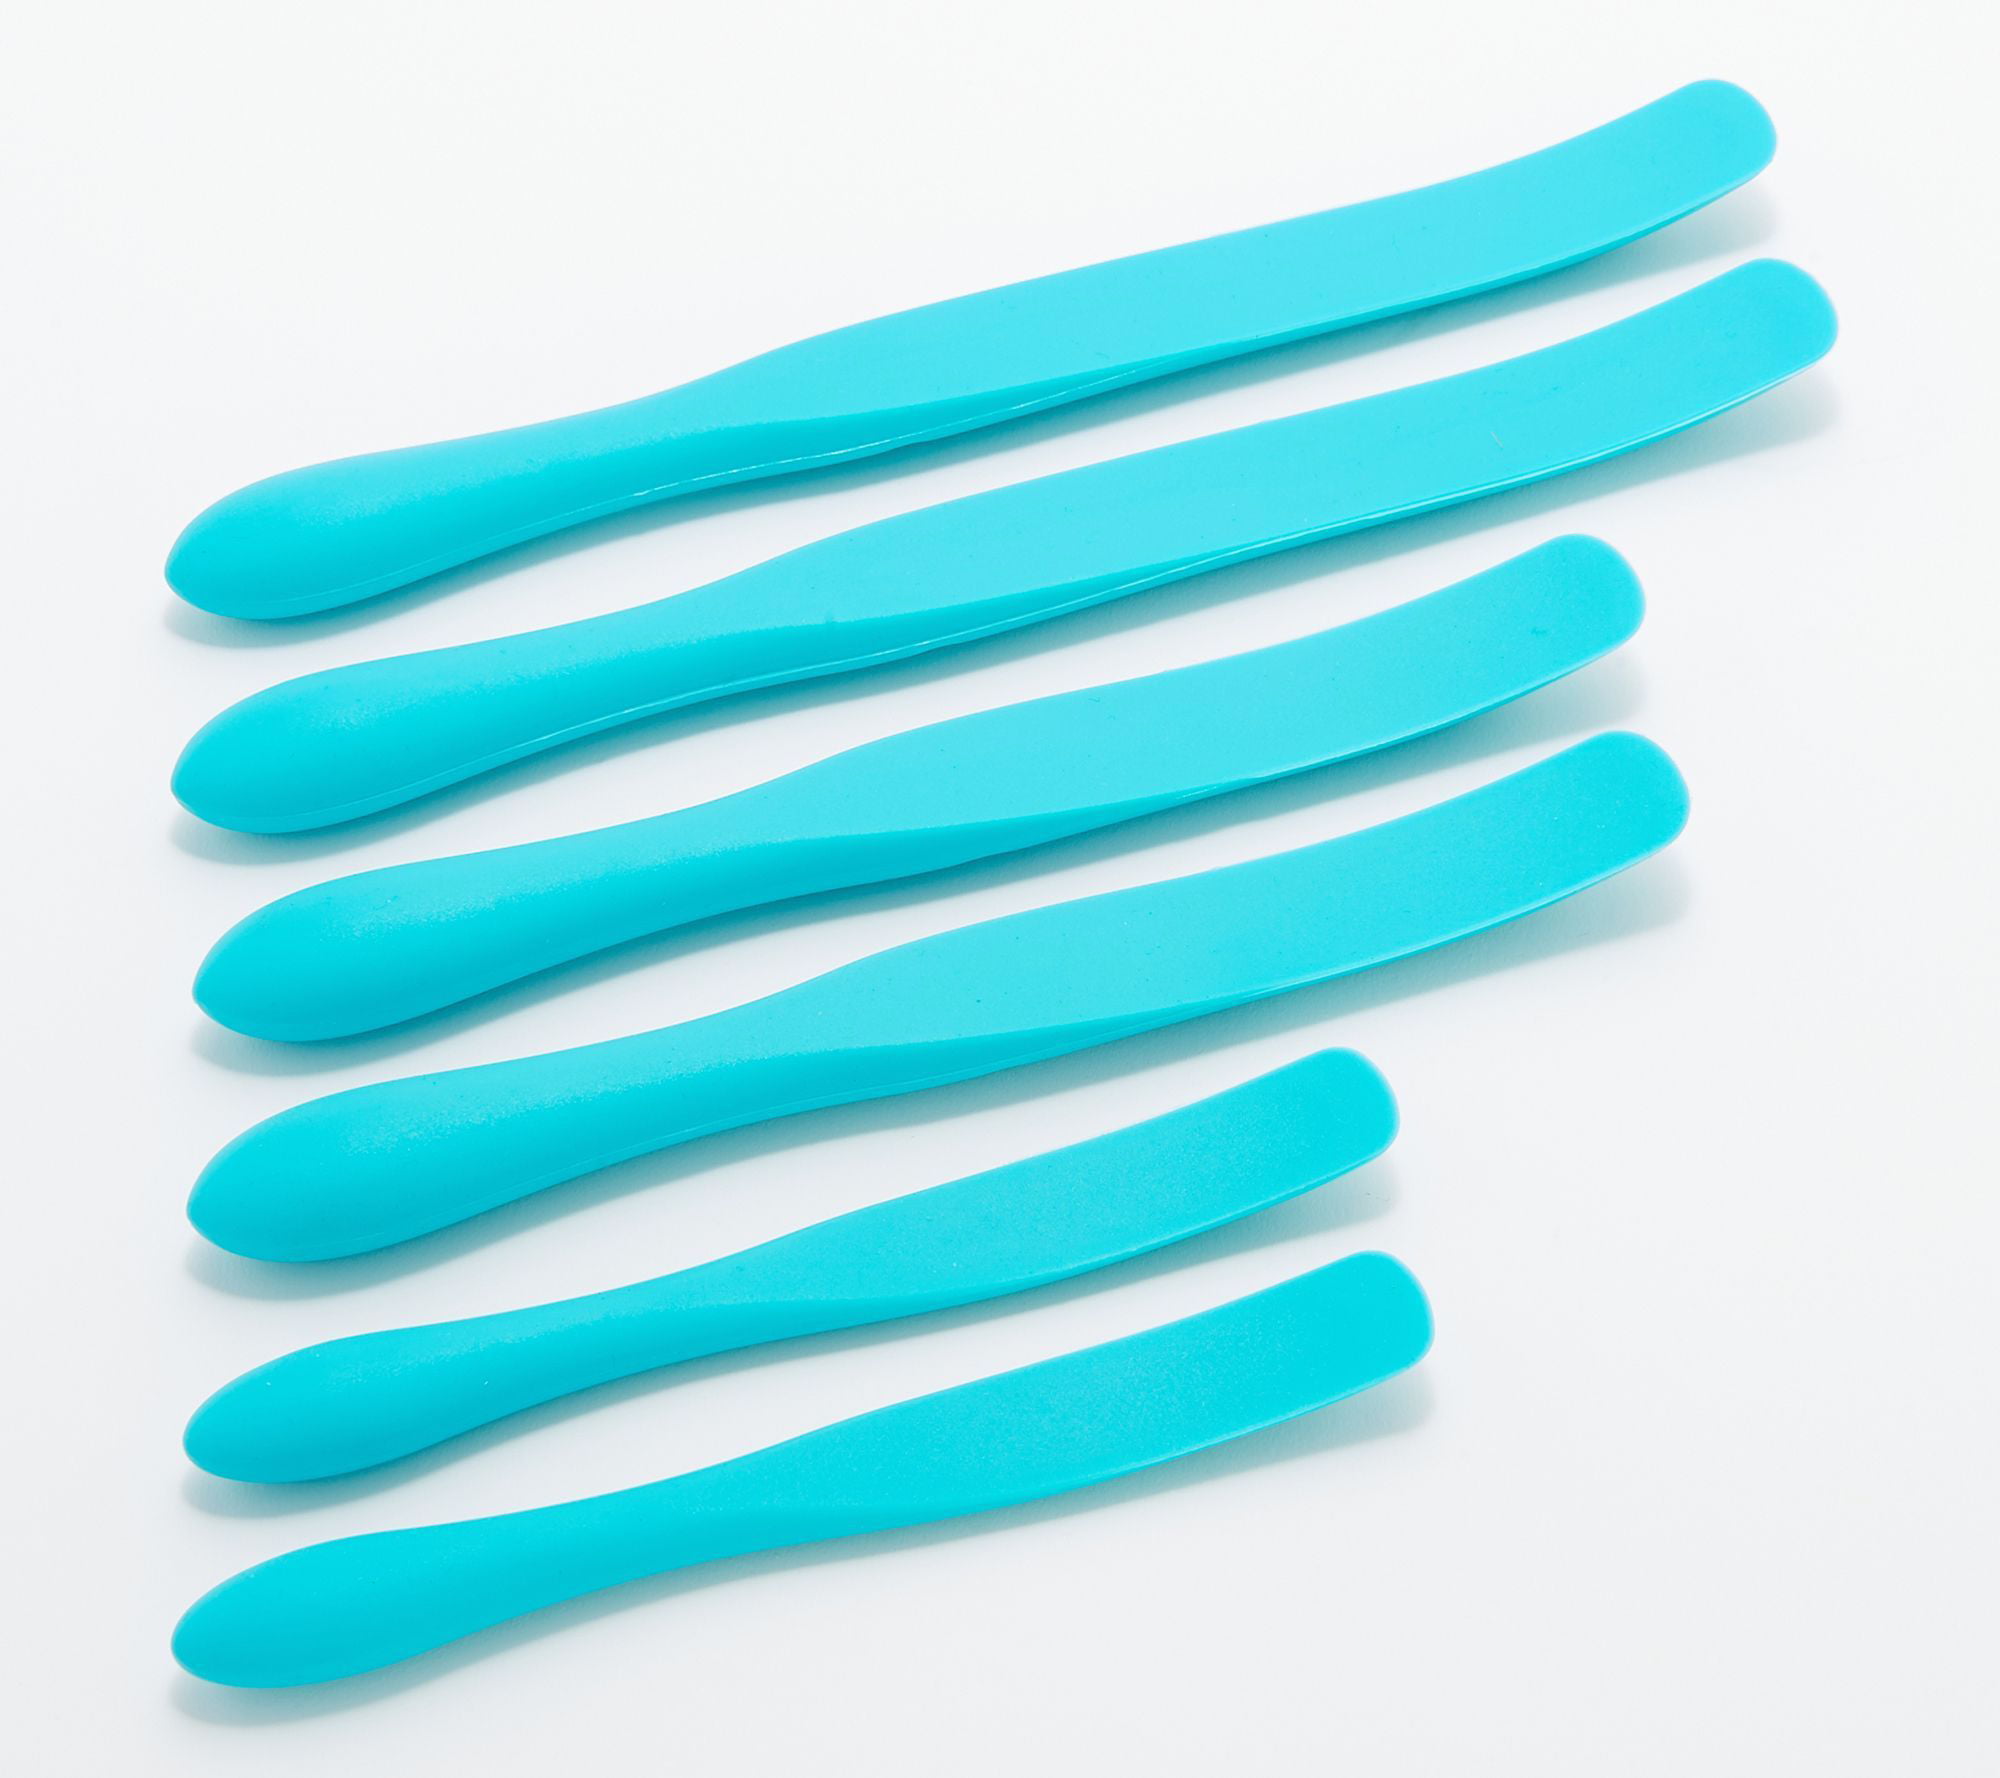 Teal Slotted Spurtle Mad Hungry Silicone Kitchen Utensil Cooking Spoon NEW